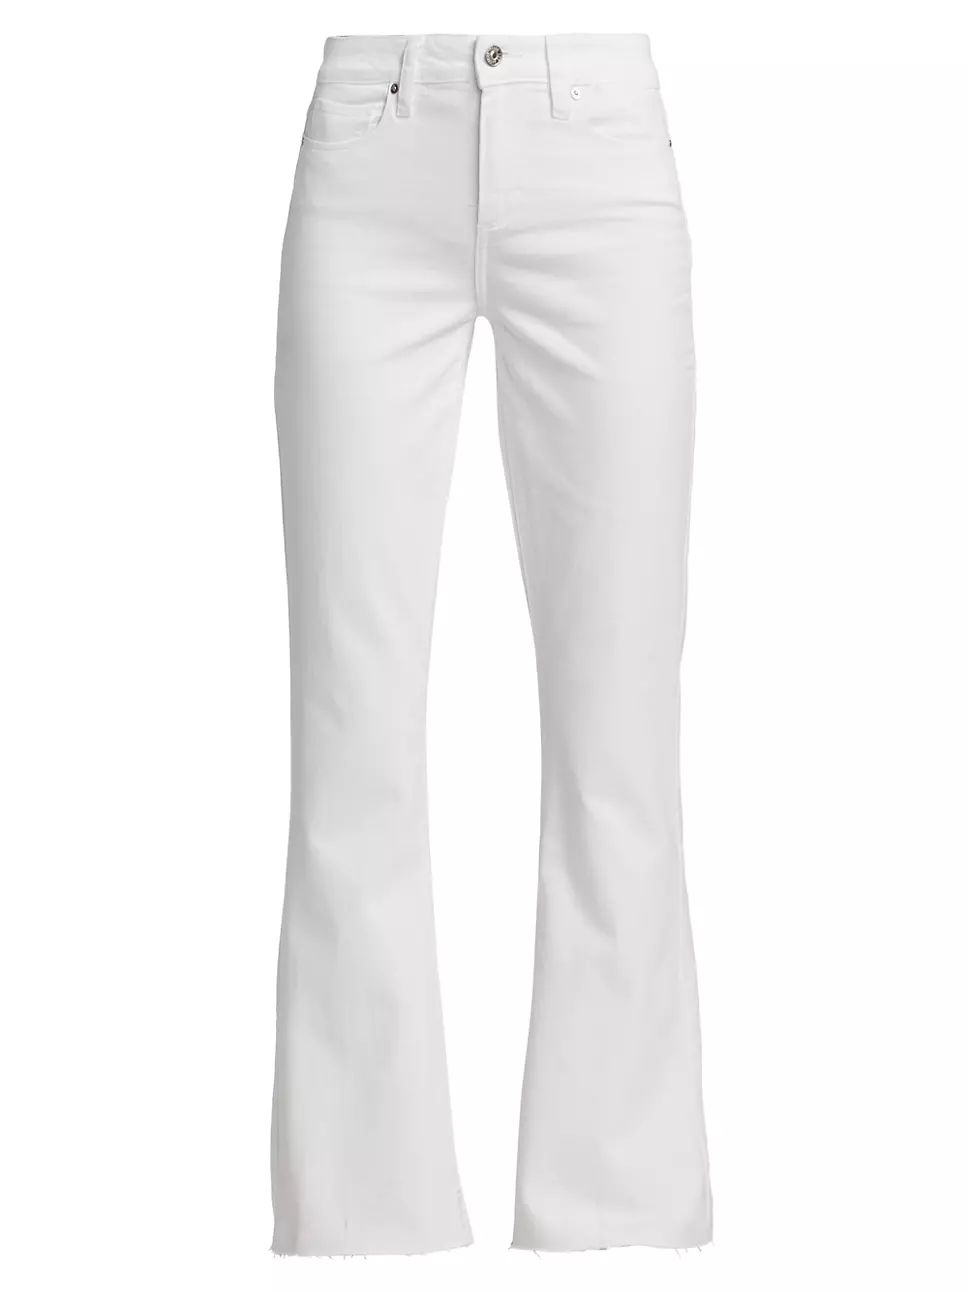 Paige Flared Laurel Canyon Jeans | Saks Fifth Avenue